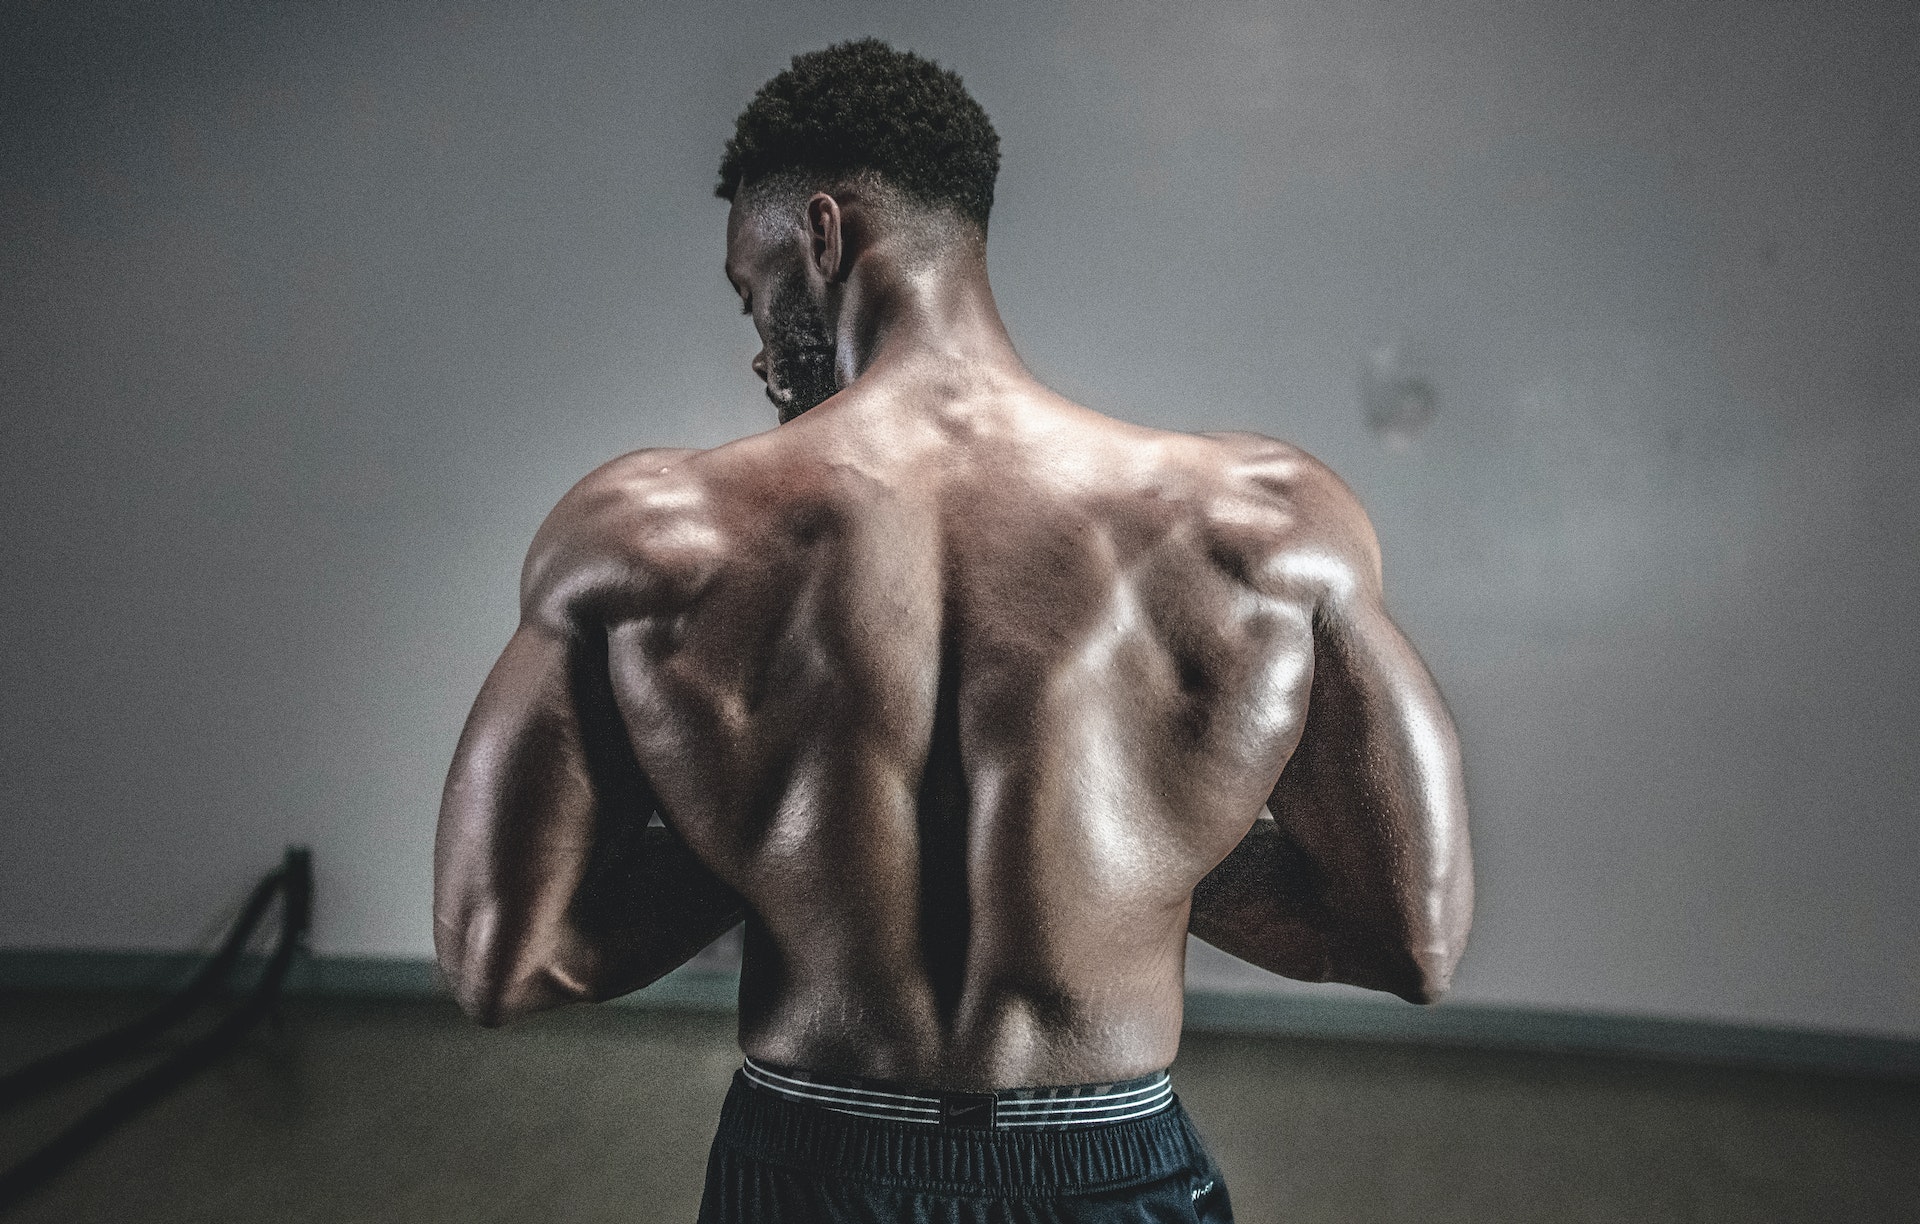 How to get wider shoulders without weights